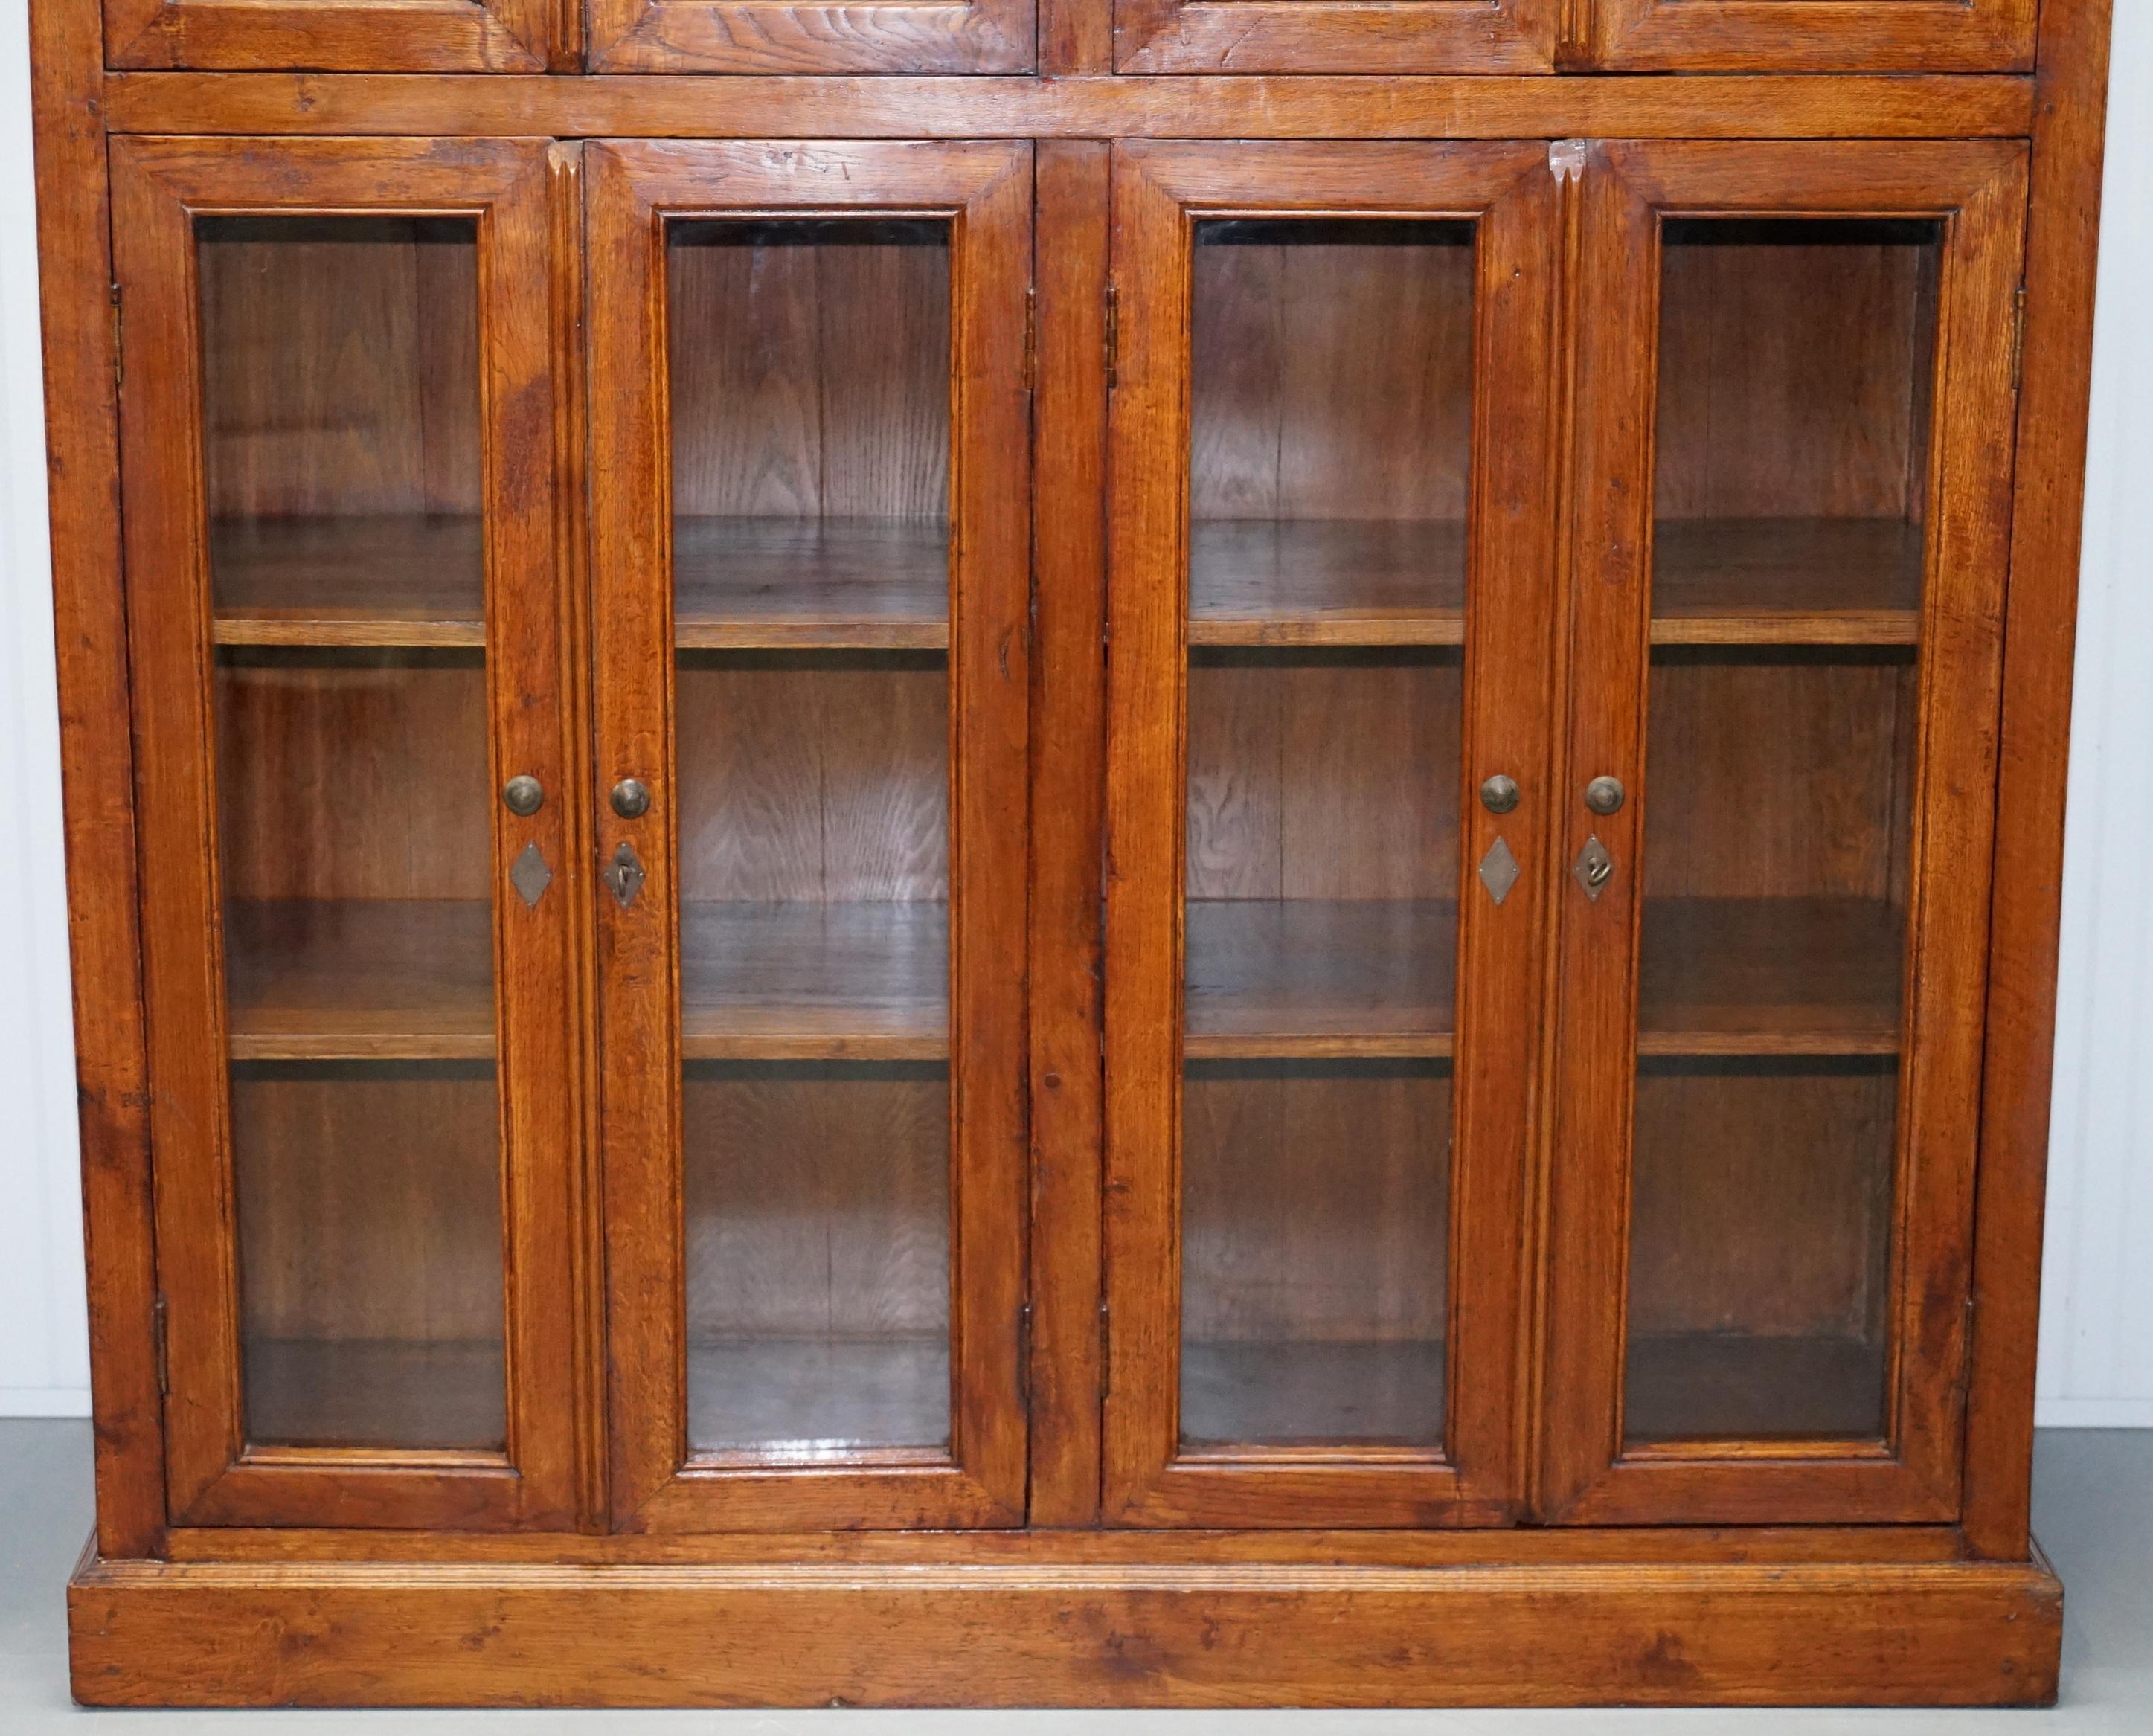 Hand-Carved Large Edwardian Panelled Mahogany Bookcase Cabinet Four Lockable Cupboard Doors